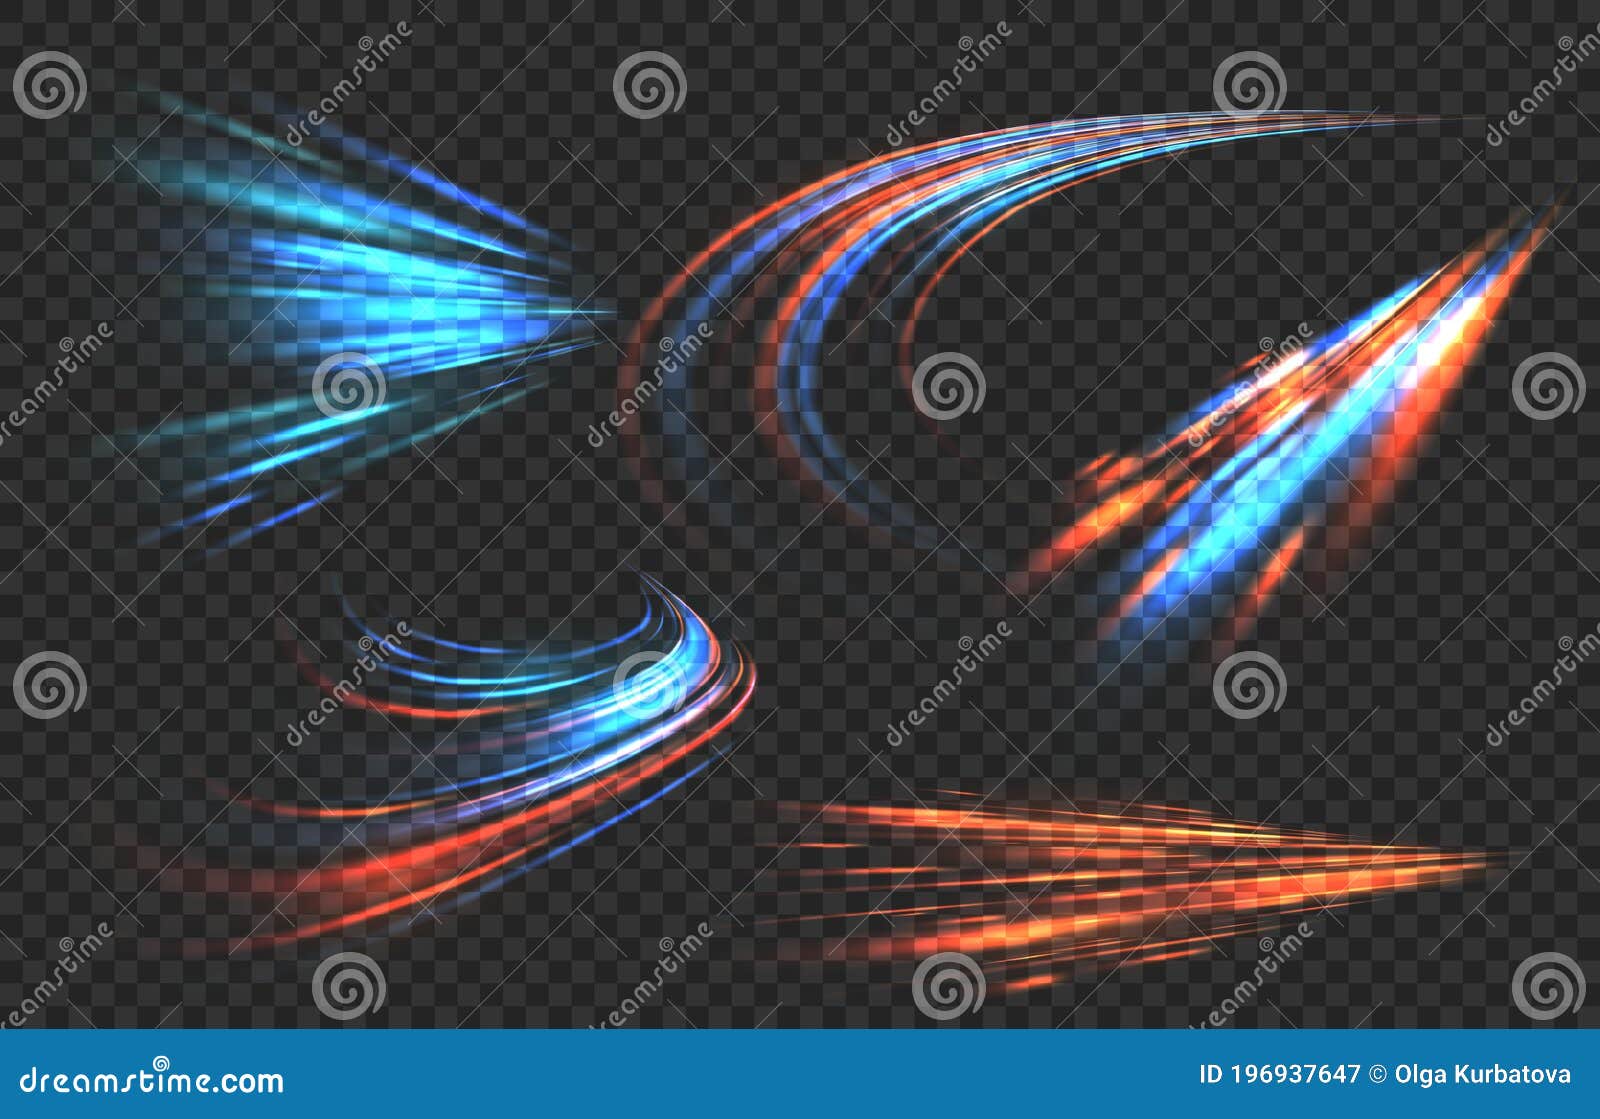 light motion trails. high speed effect motion blur night lights in blue and red colors, abstract flash perspective road